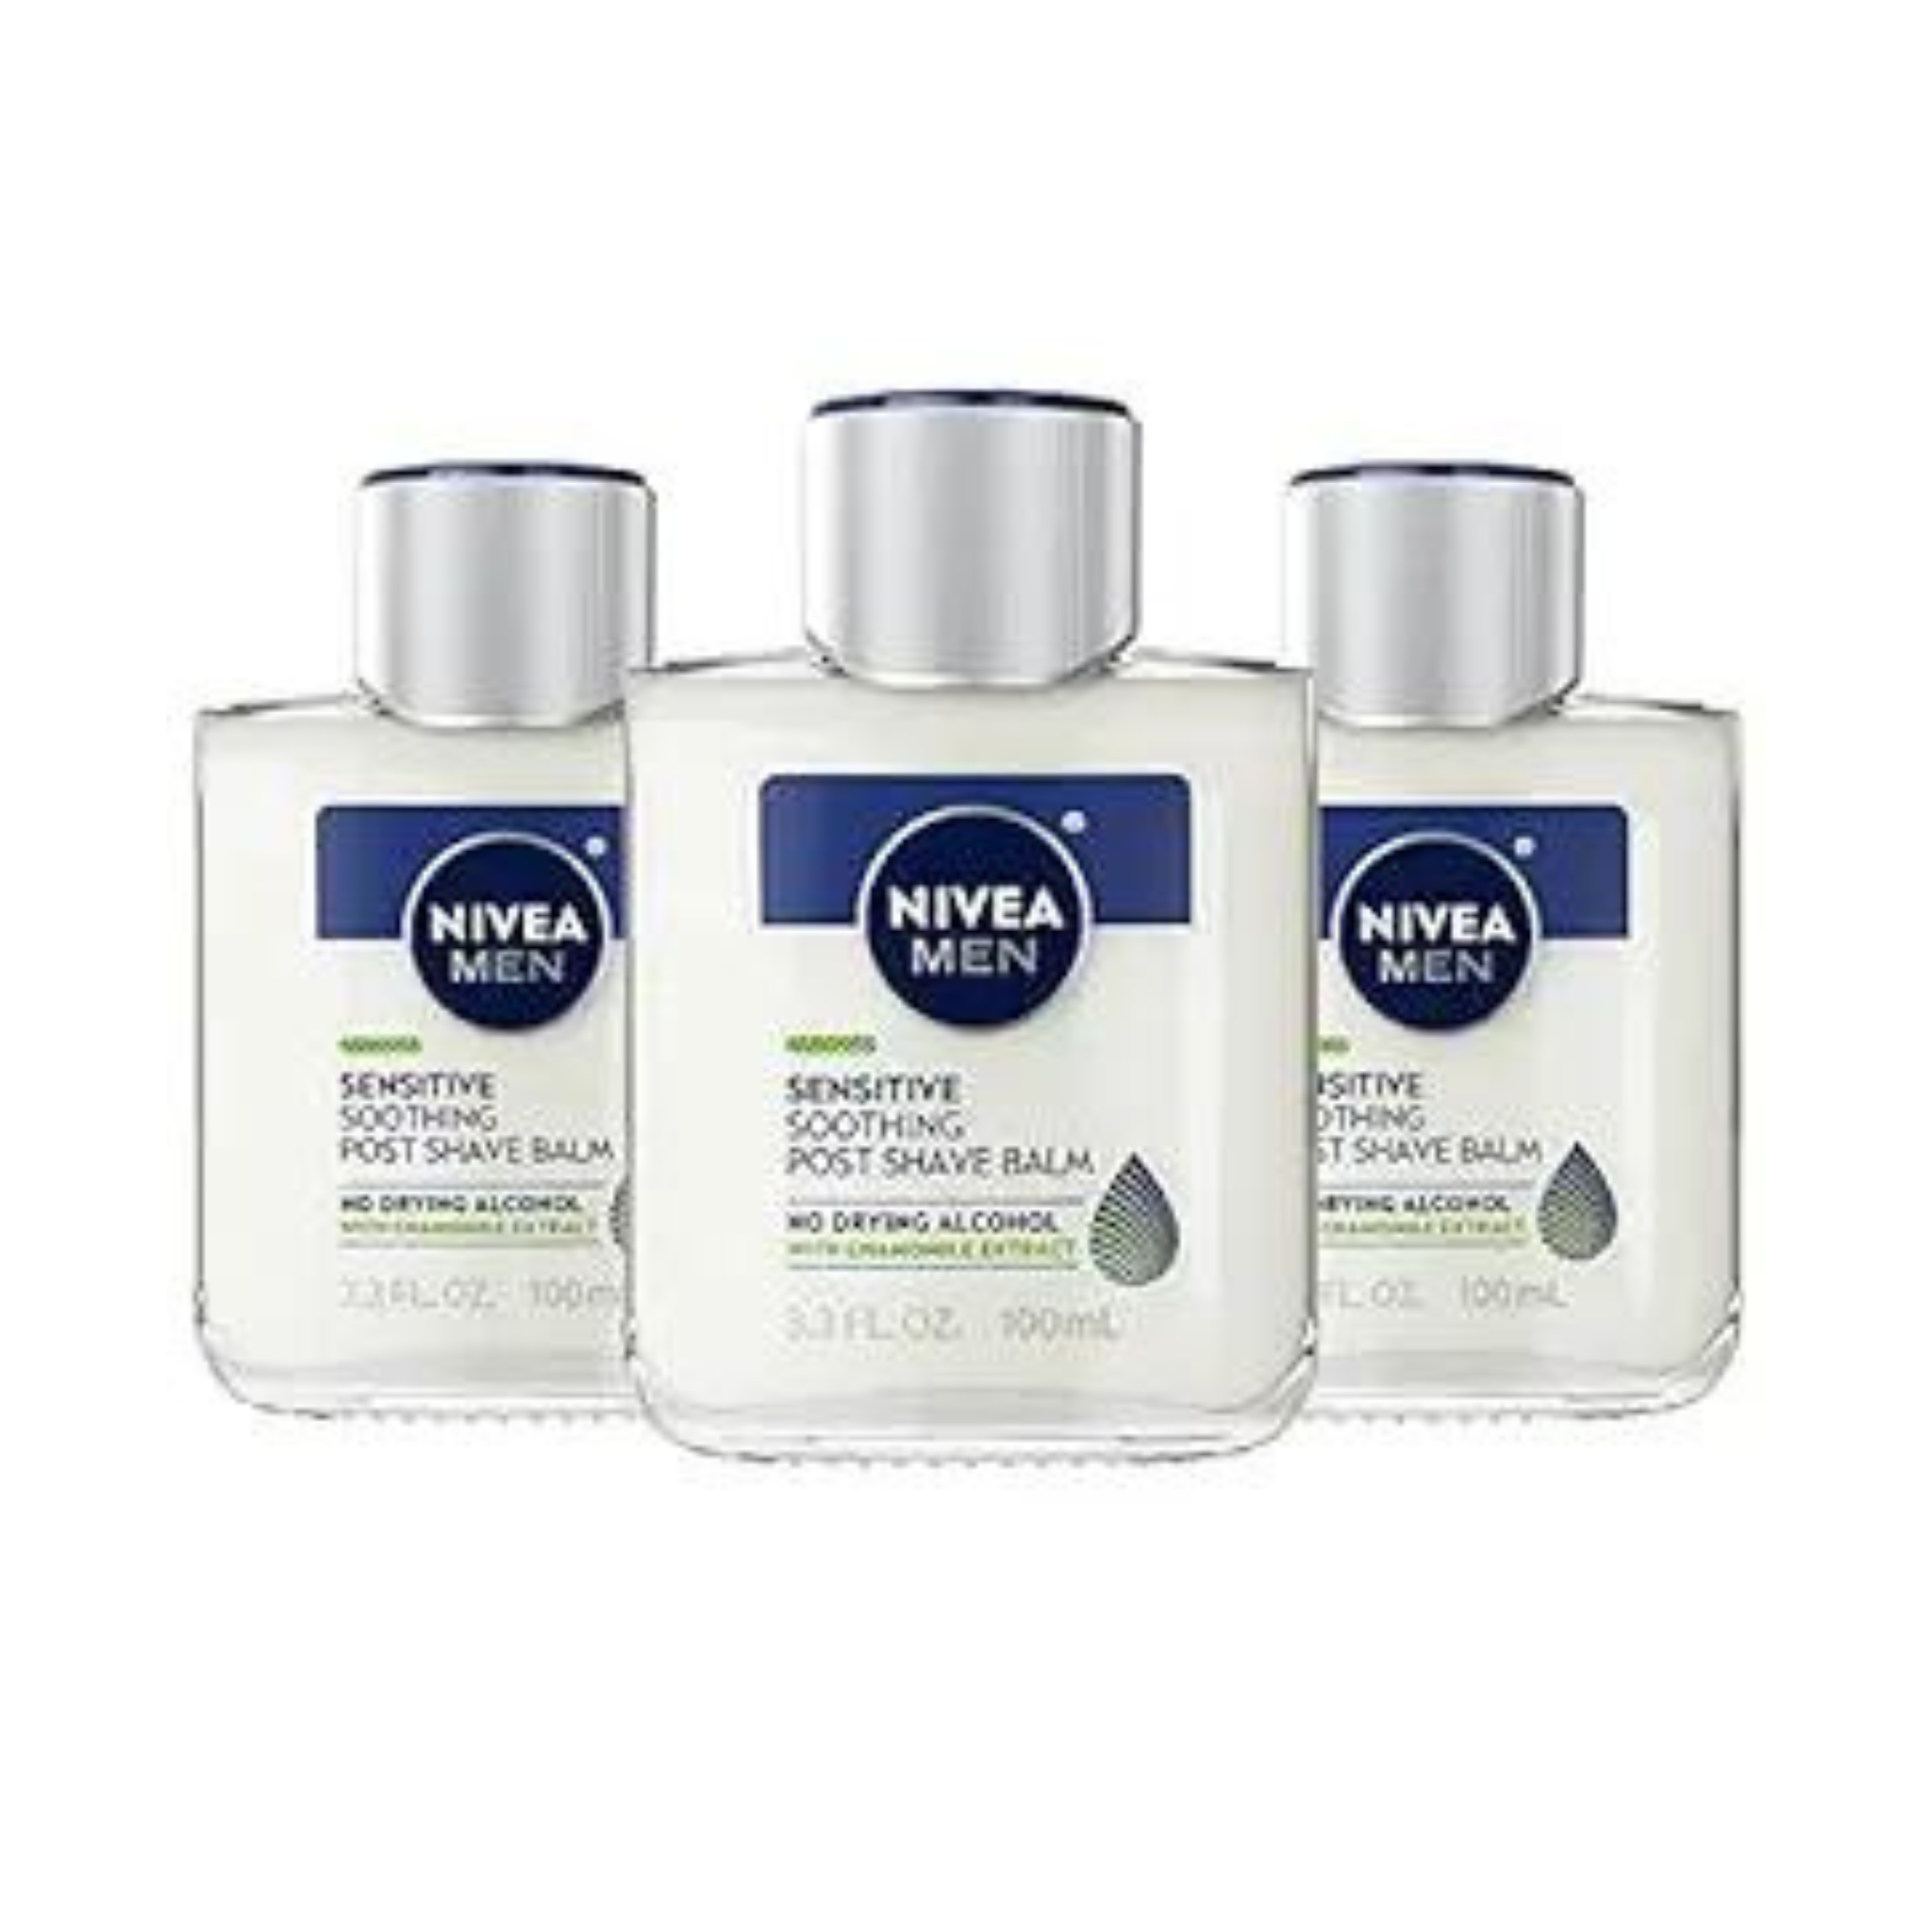 3-Pack 3.3-Oz Nivea Men Sensitive Soothing Post Shave Balm w/ Chamomile Extract